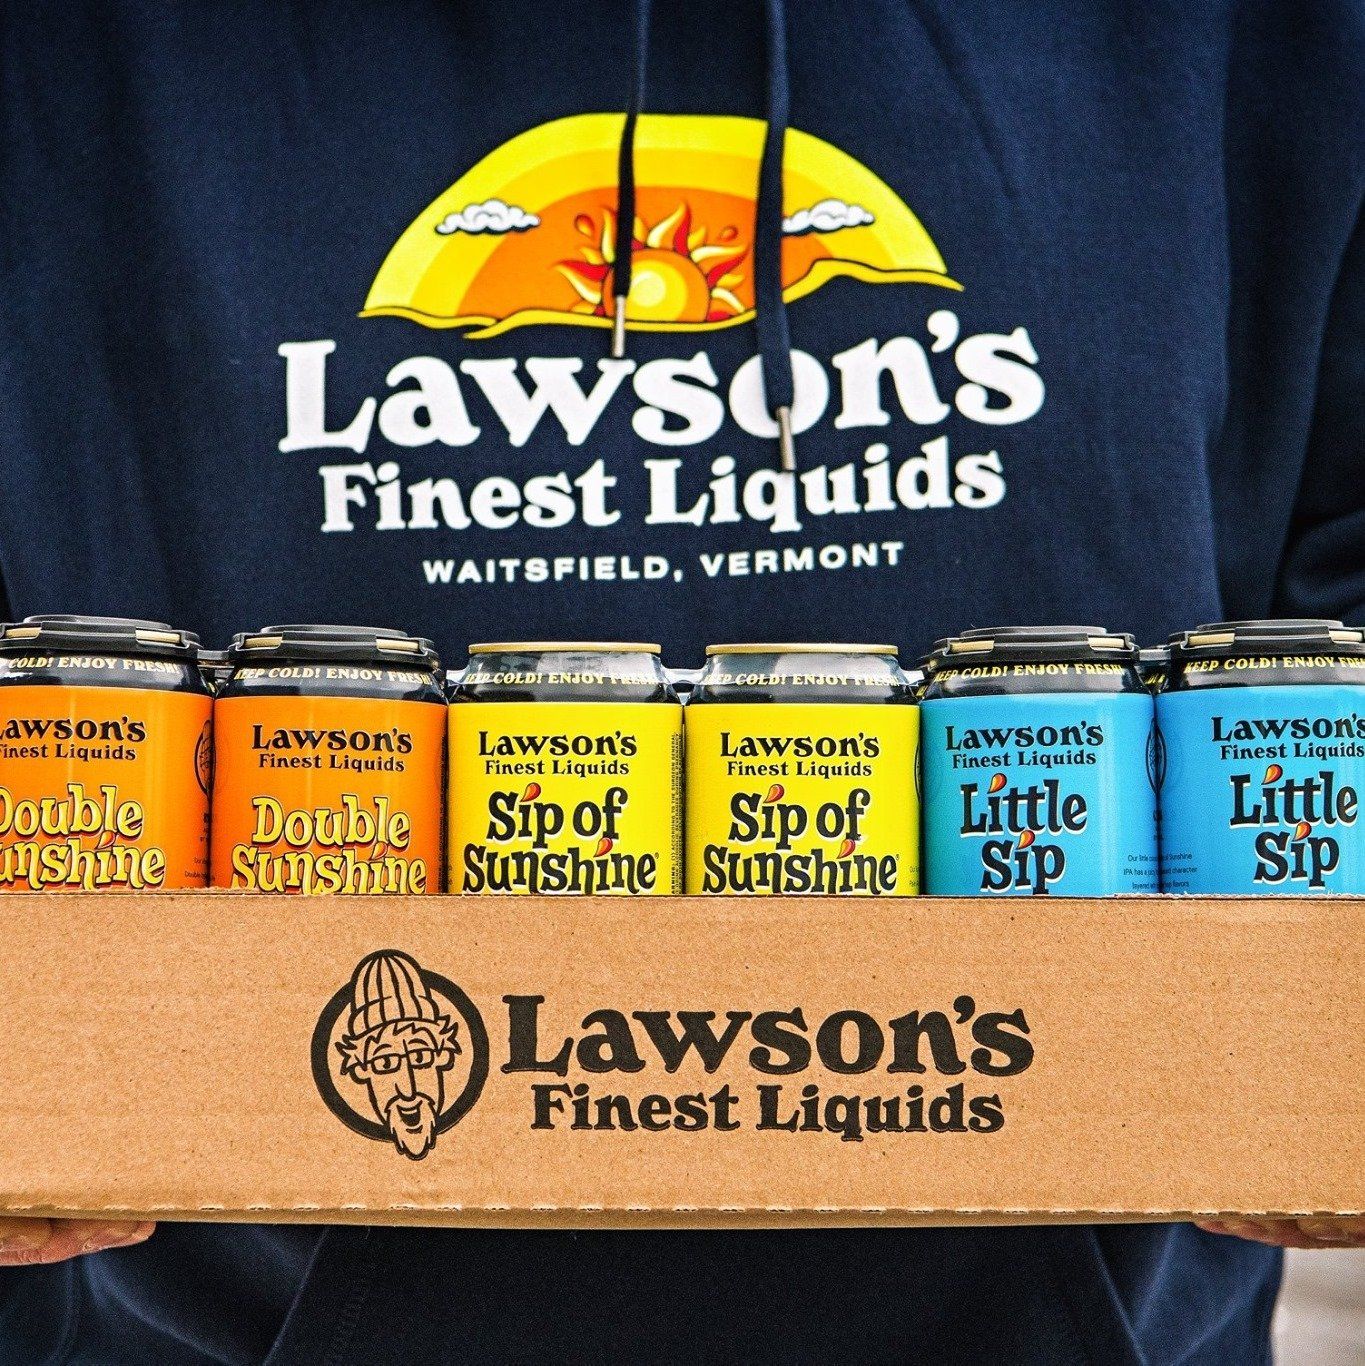 An array of Lawson's Finest Liquids beers from Waitsfield, Vermont